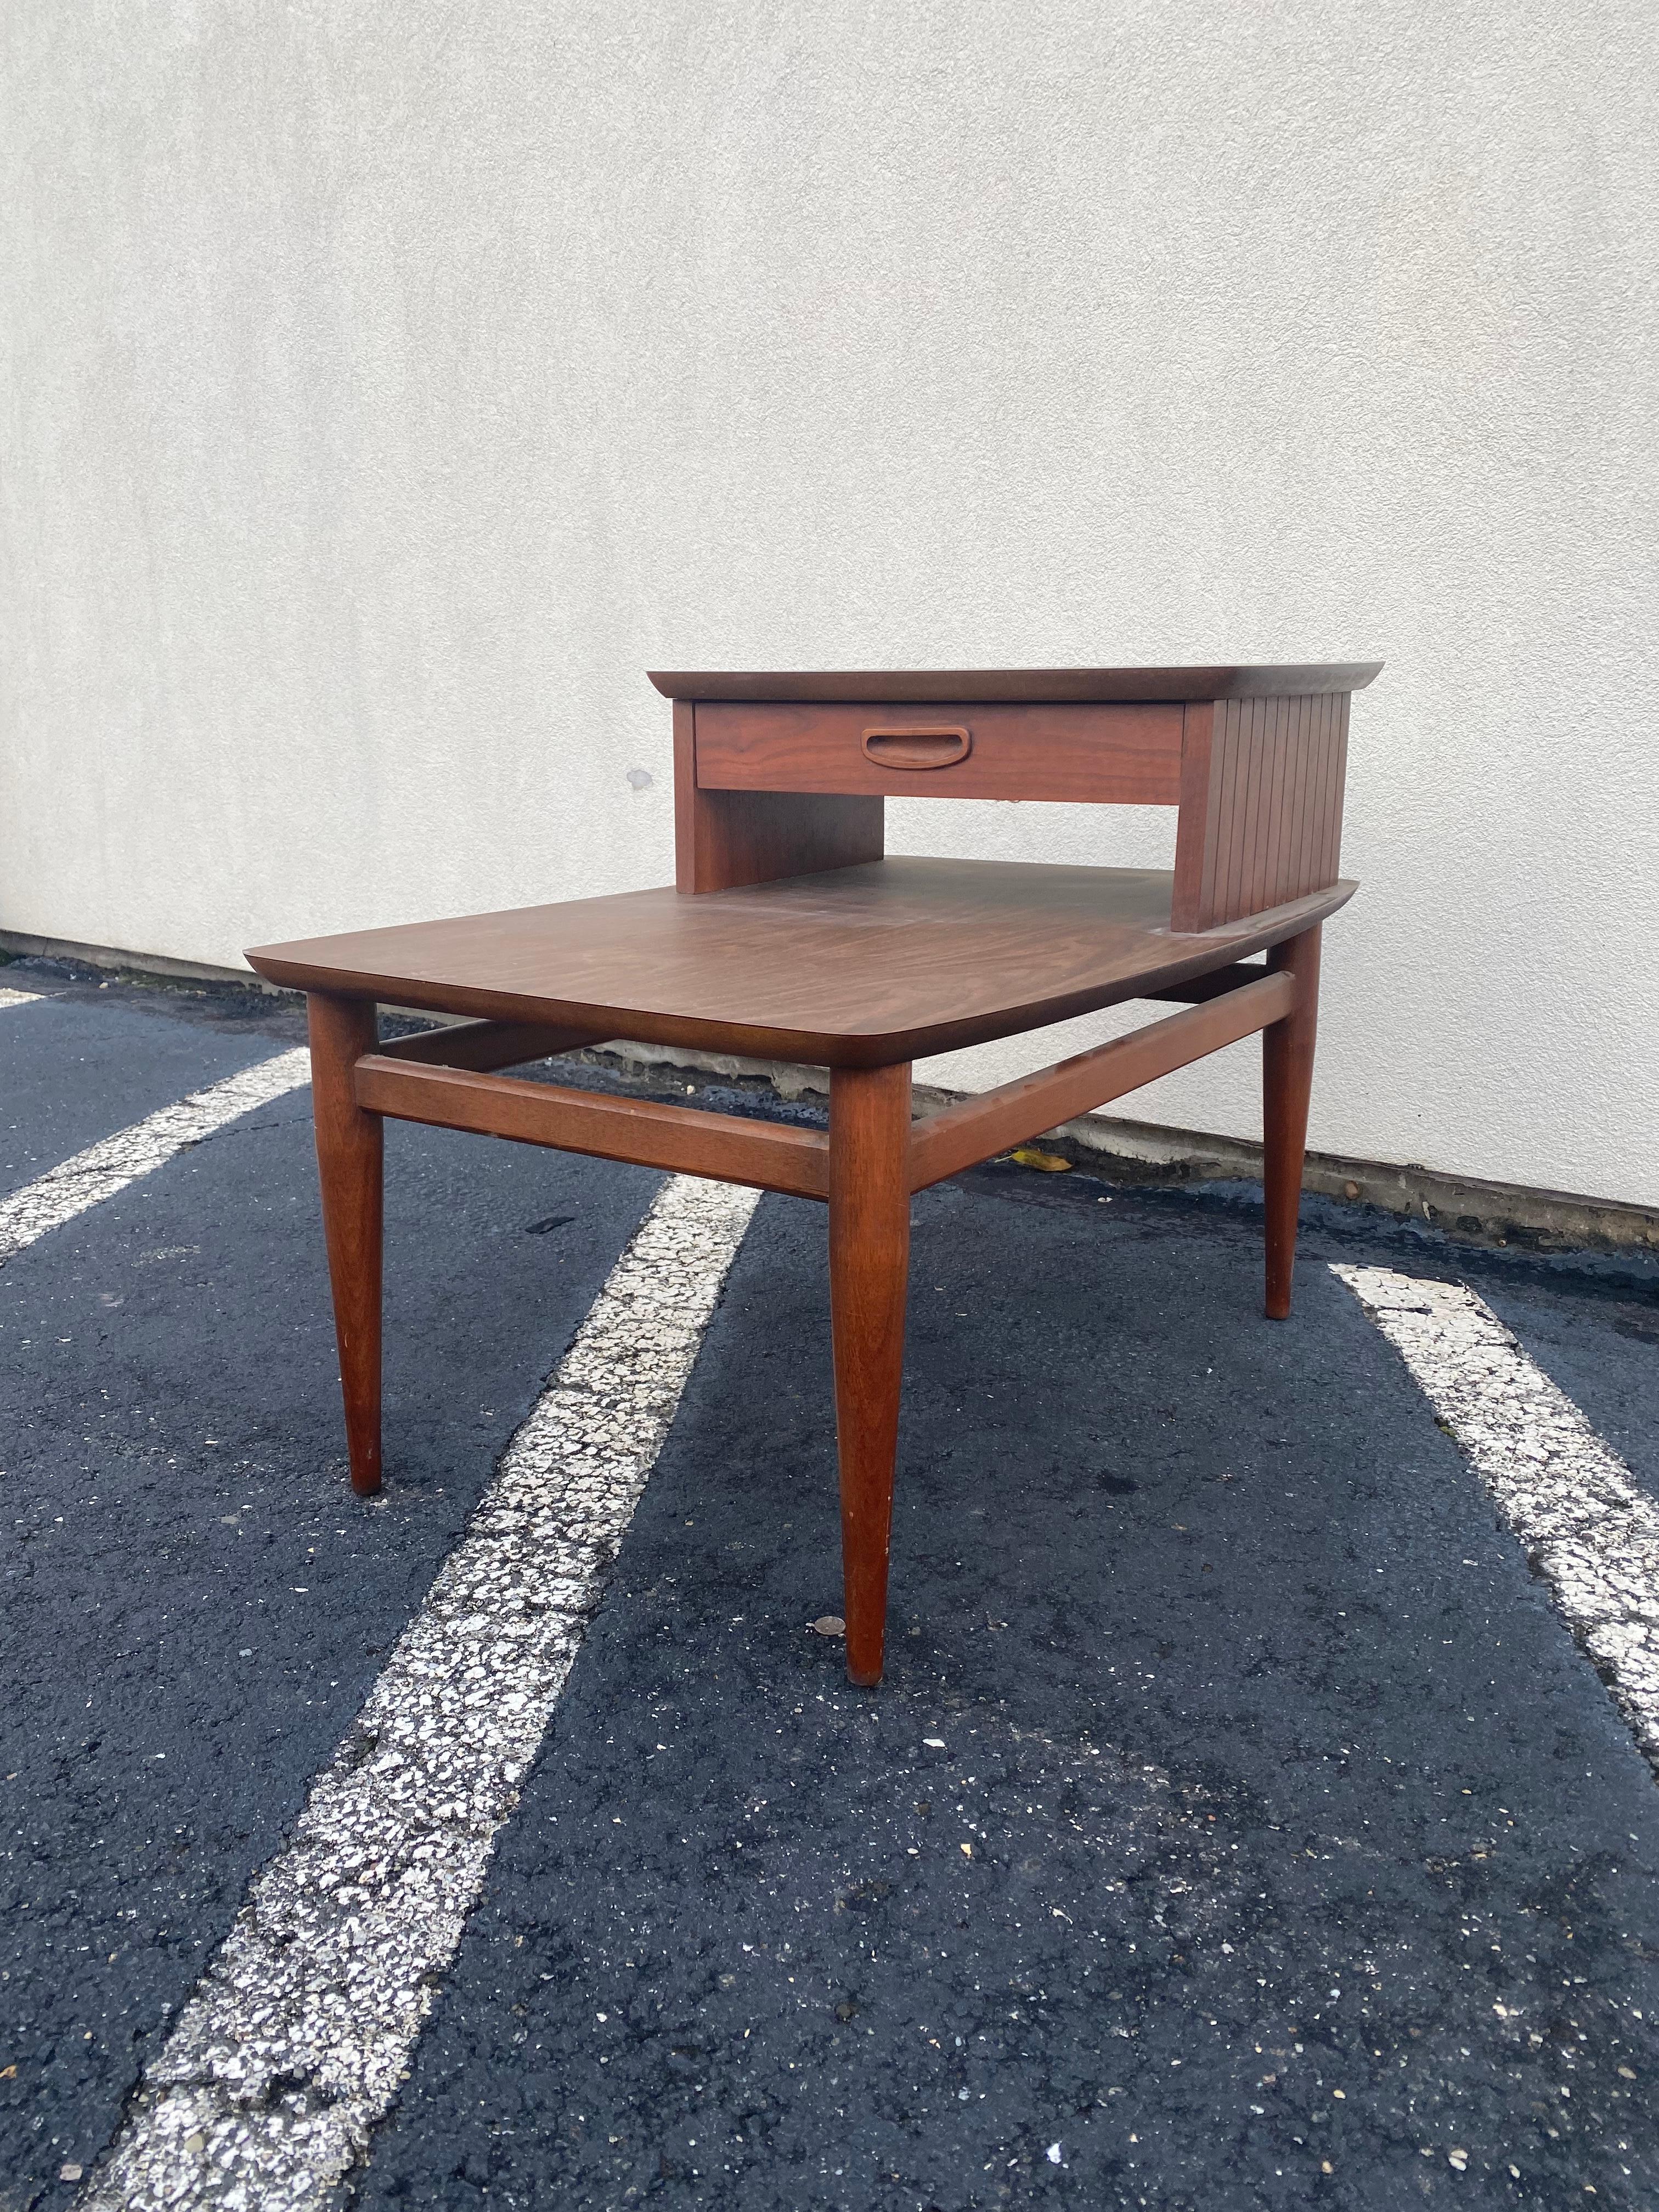 Mid-century two-tier lamp table by Lane. Walnut table with laminate top and drawer with recessed pull. Beautiful wood tone and tapered legs with vertical reed detail at side.